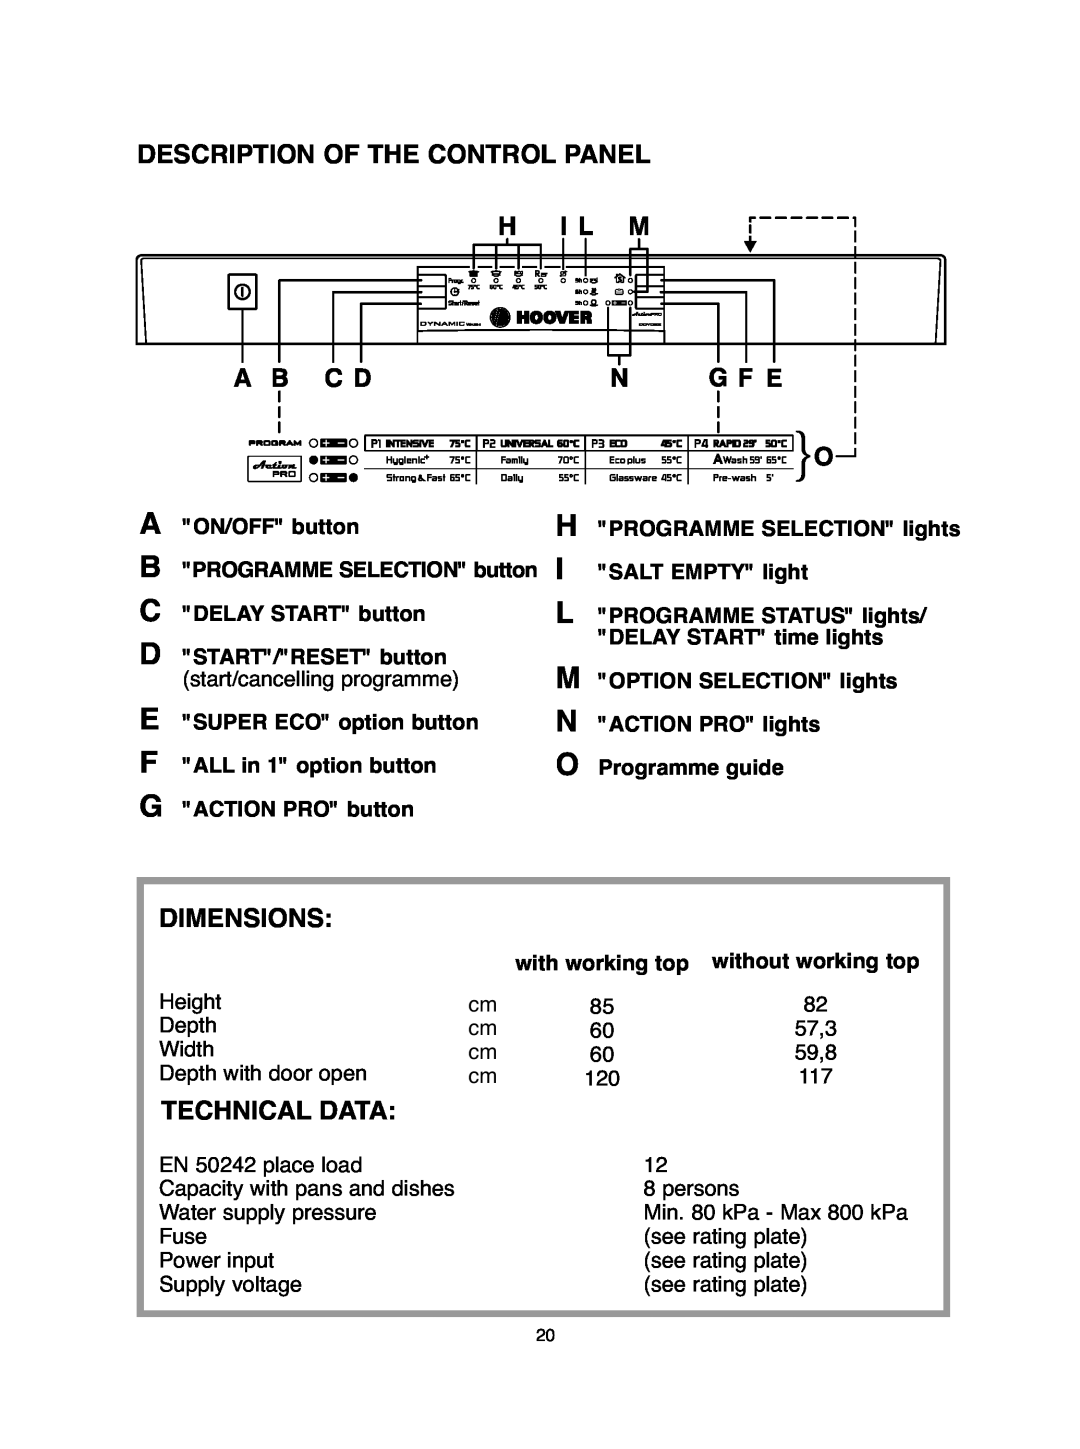 Hoover DDY 062 manual Description Of The Control Panel, Dimensions, Technical Data 